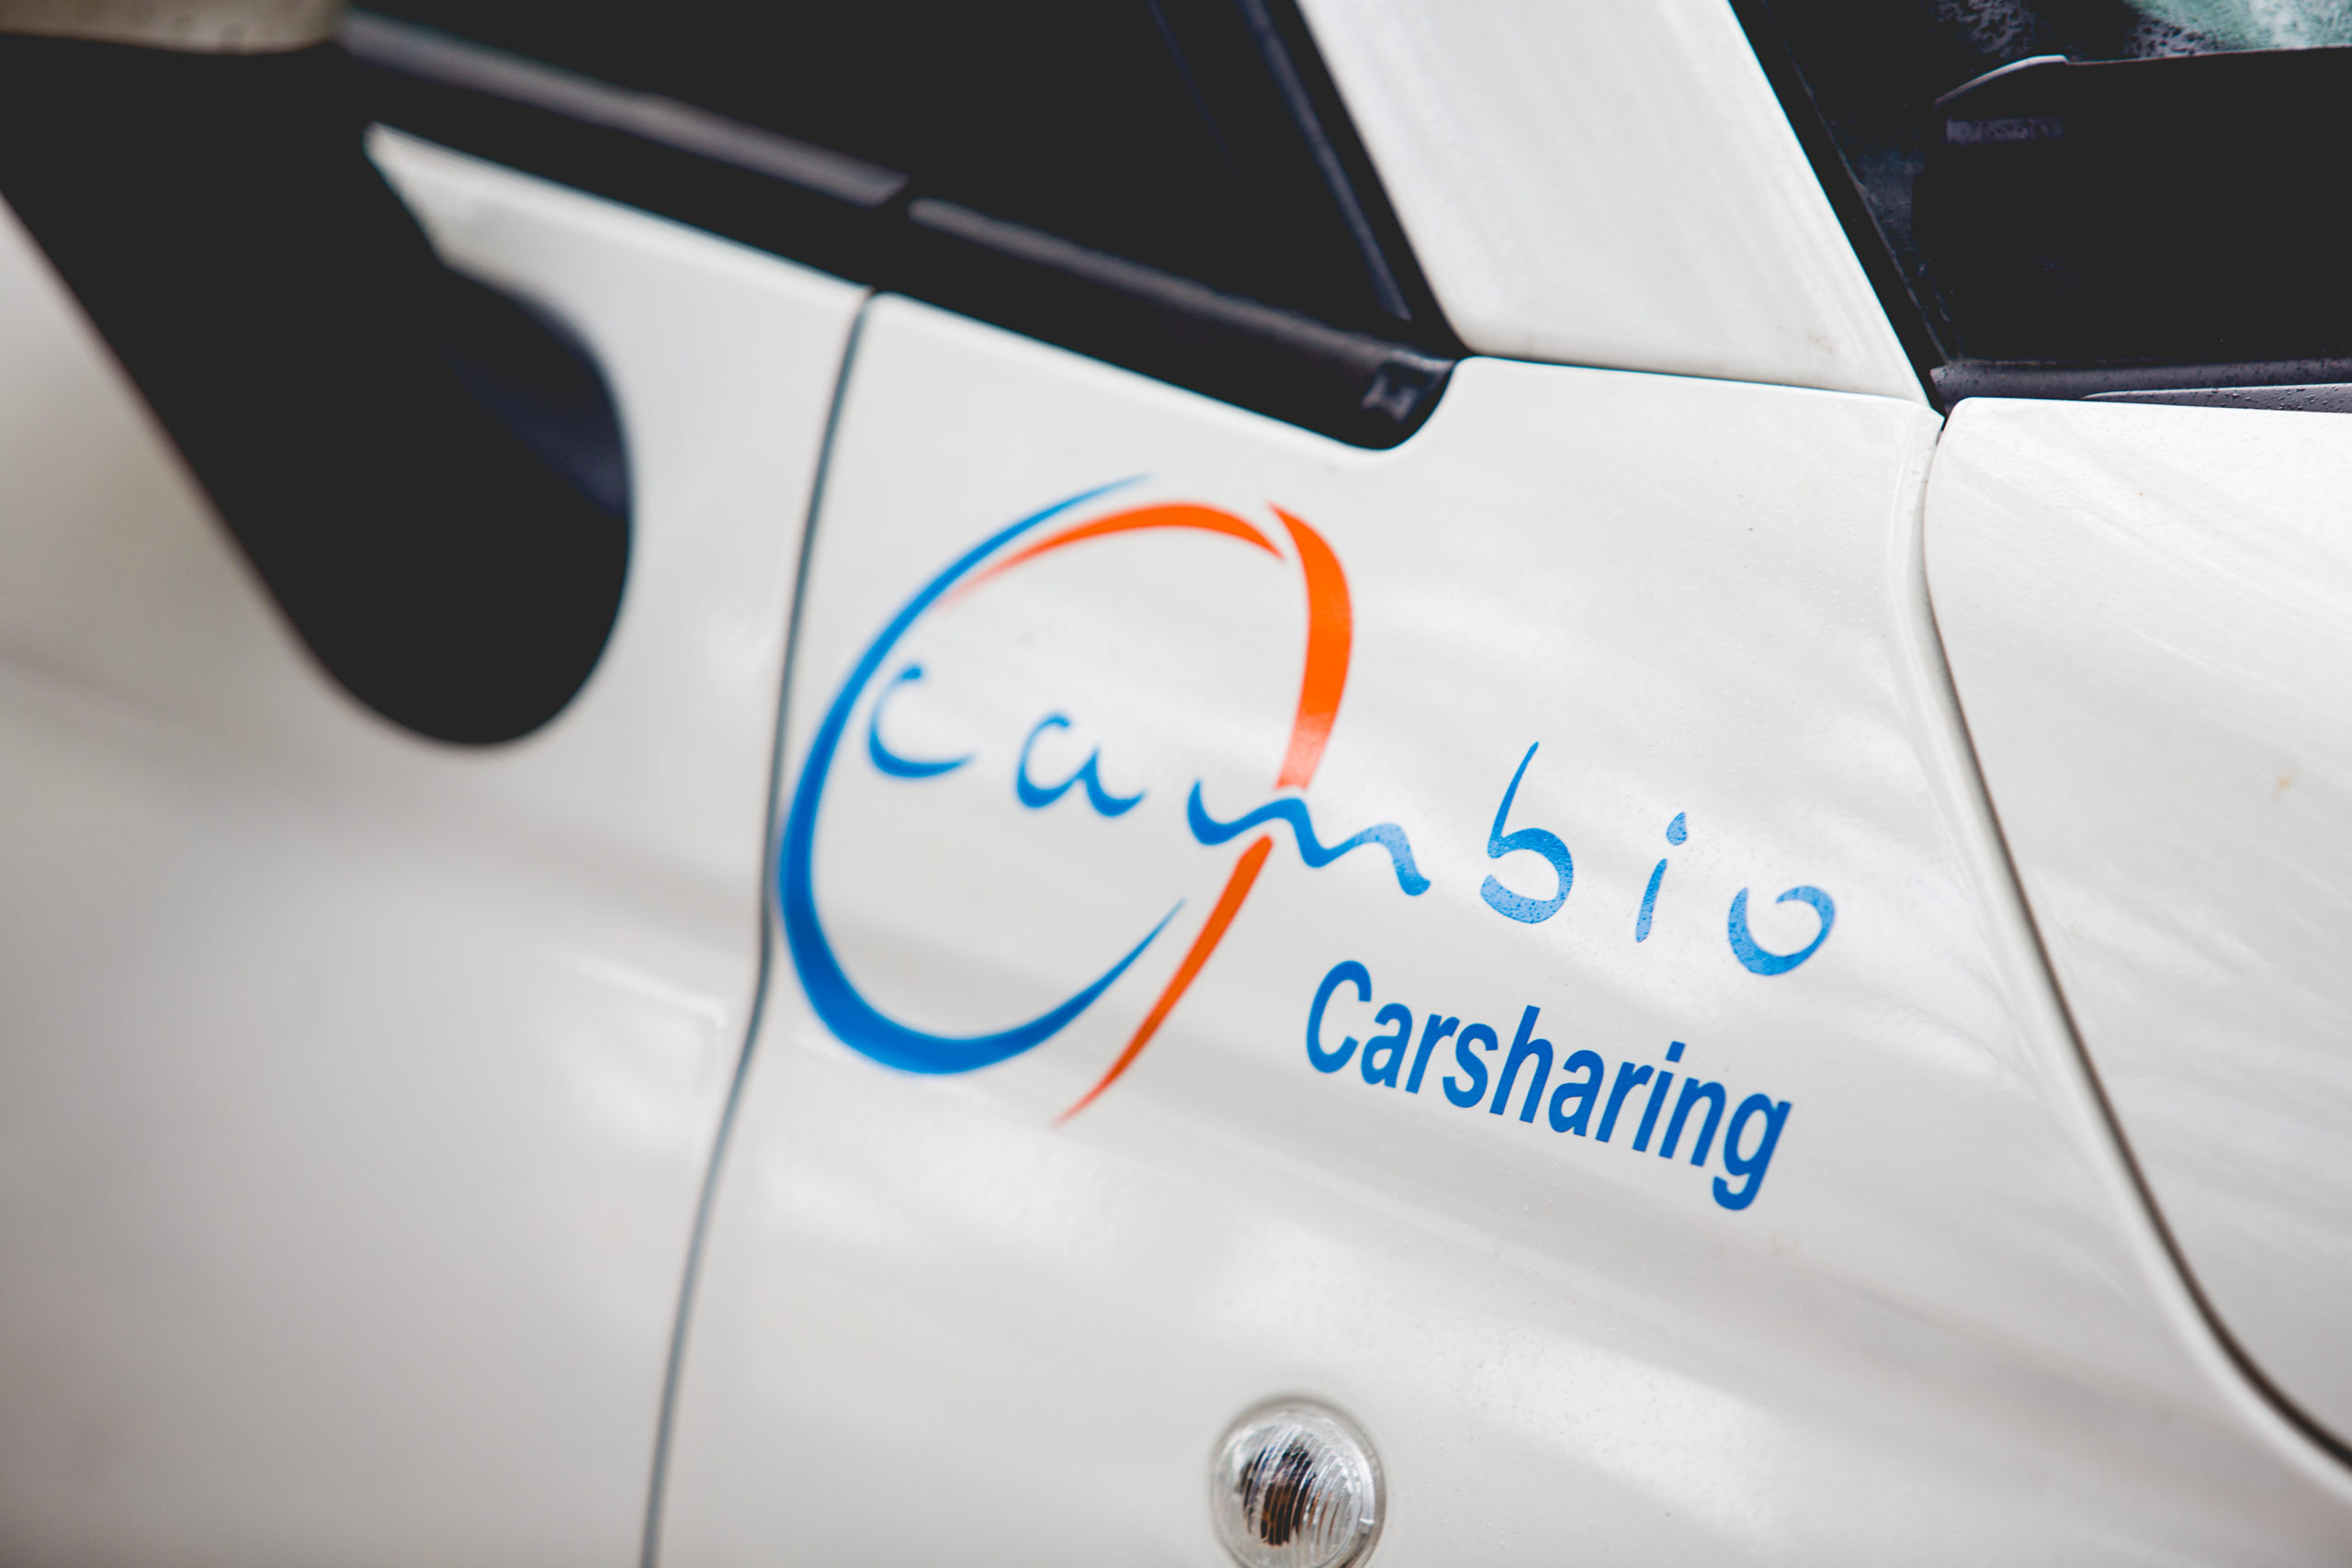 Cambio finally goes electric in Brussels